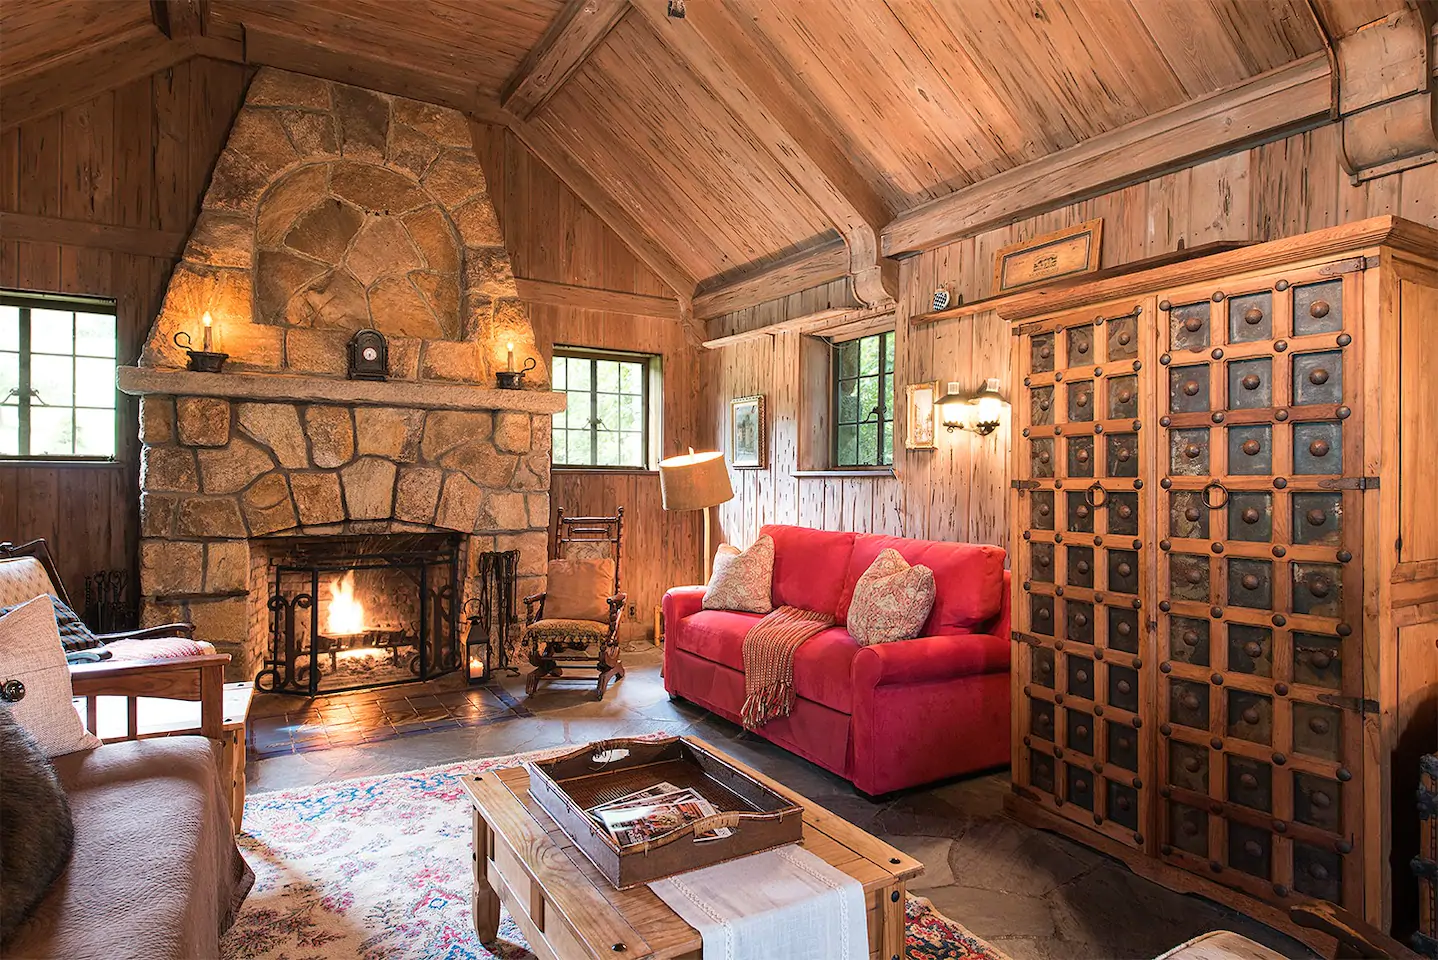 Cozy cabin interior with sofa and fireplace